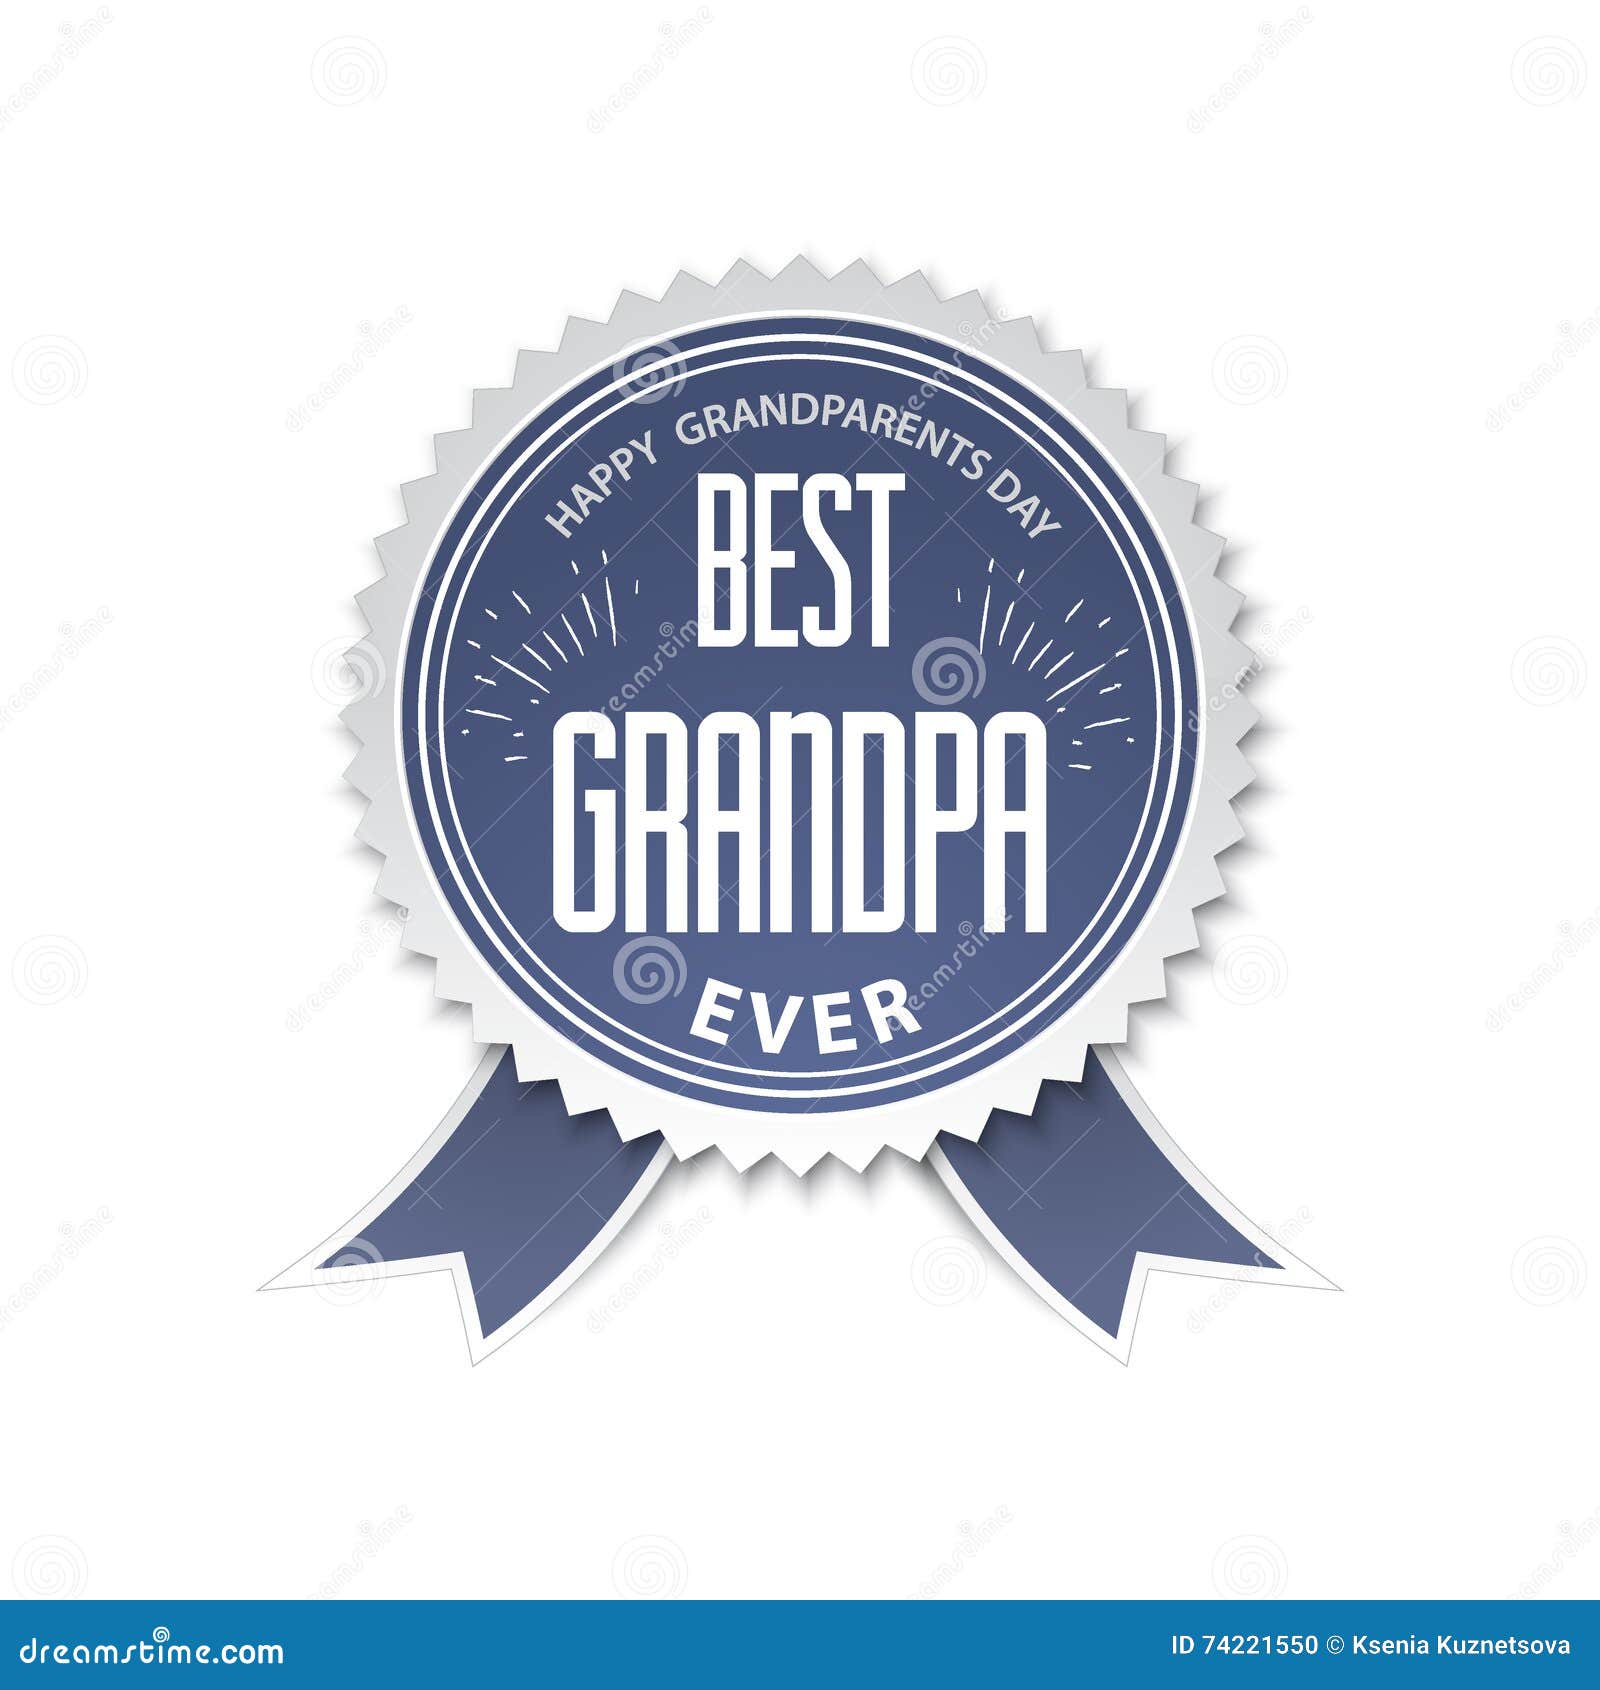 Download The Best Grandpa Badge With Ribbon Illustration Happy Grandparents Day Stock Illustration Illustration Of Competition Label 74221550